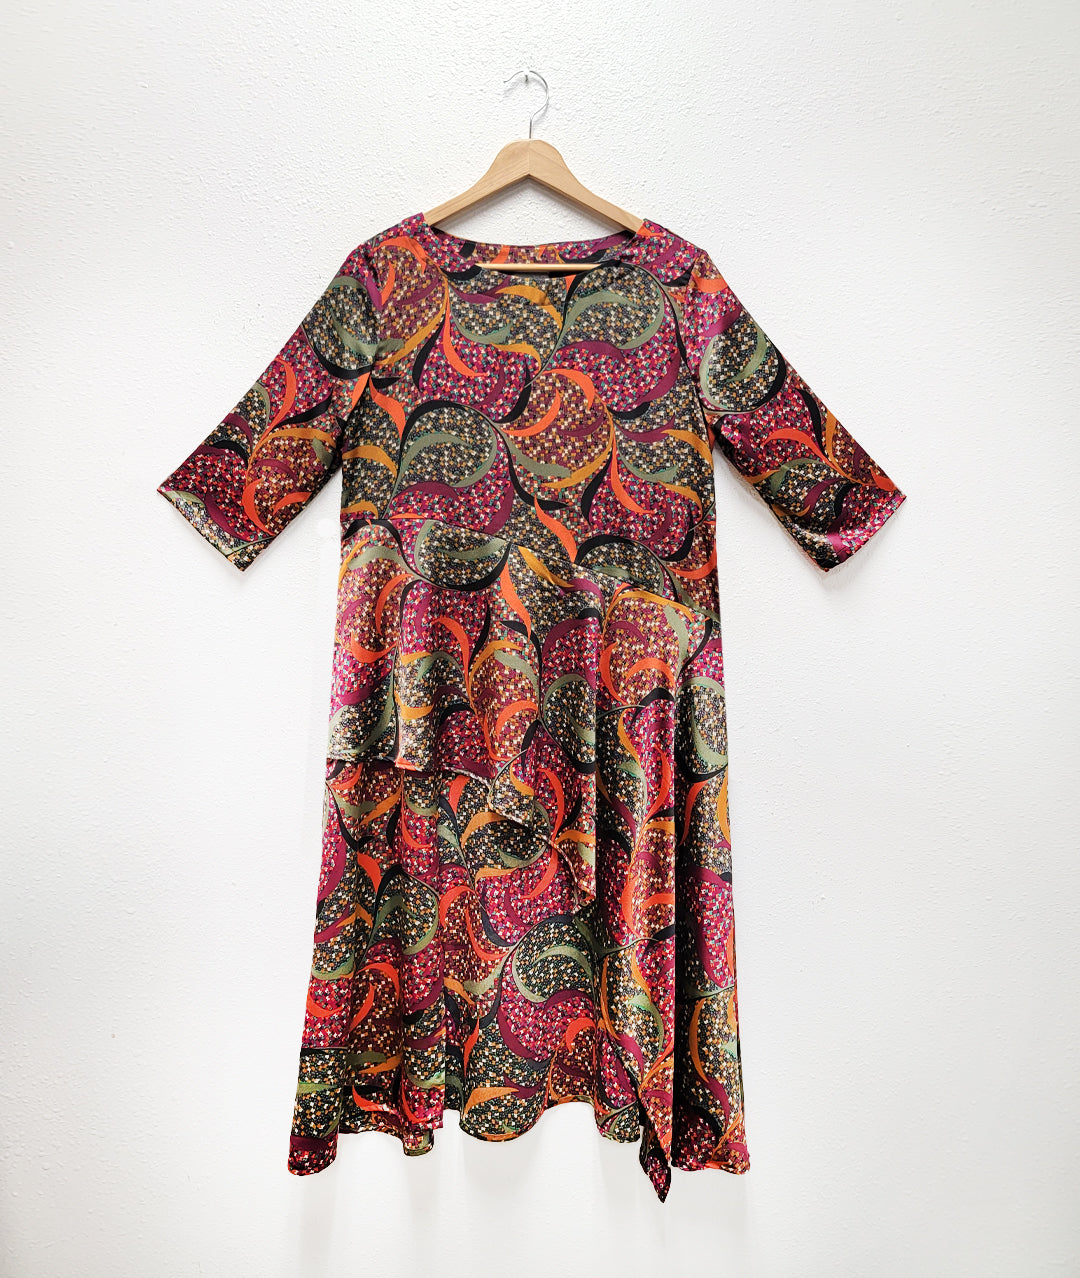 multi color swirl print tunic with elbow length sleeves and an asymmetrical waist and skirt, with a short front and long sides and back. pockets set into side seams